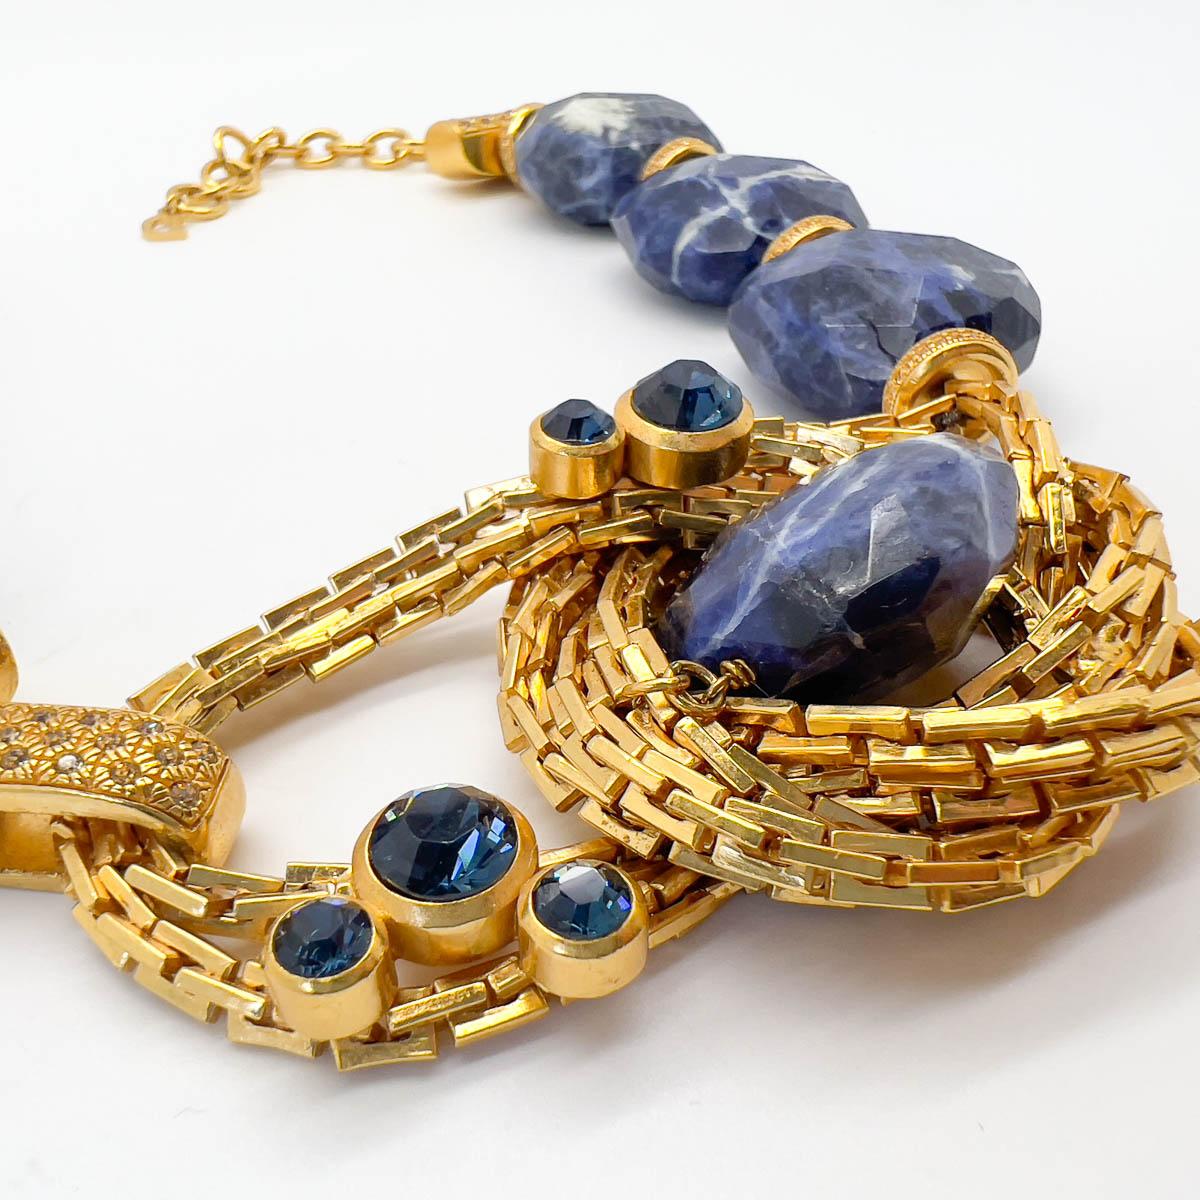 A rare and spectacular Vintage Christian Dior Runway Lapis Collar from the 1990s. A wearable work of art from the House of Dior, most likely hailing from the Gianfranco Ferré era and quite possibly a runway piece. Exceptional craftmanship, scale and